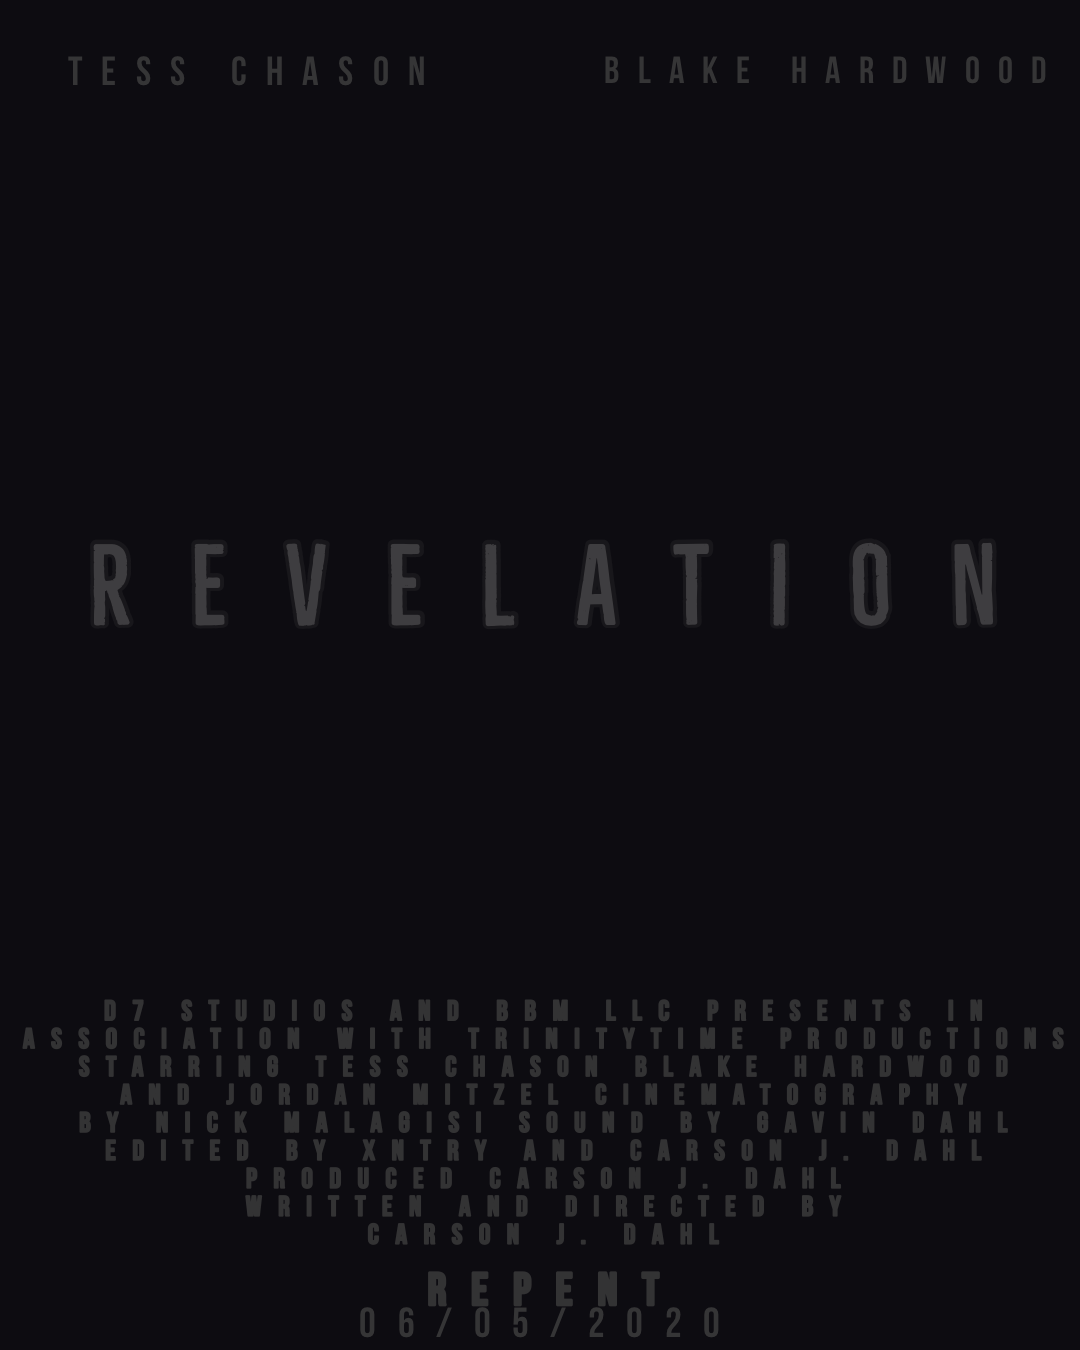 Read more about the article Casting Roles in Suspense Film “Revelation” in Huntersville, North Carolina